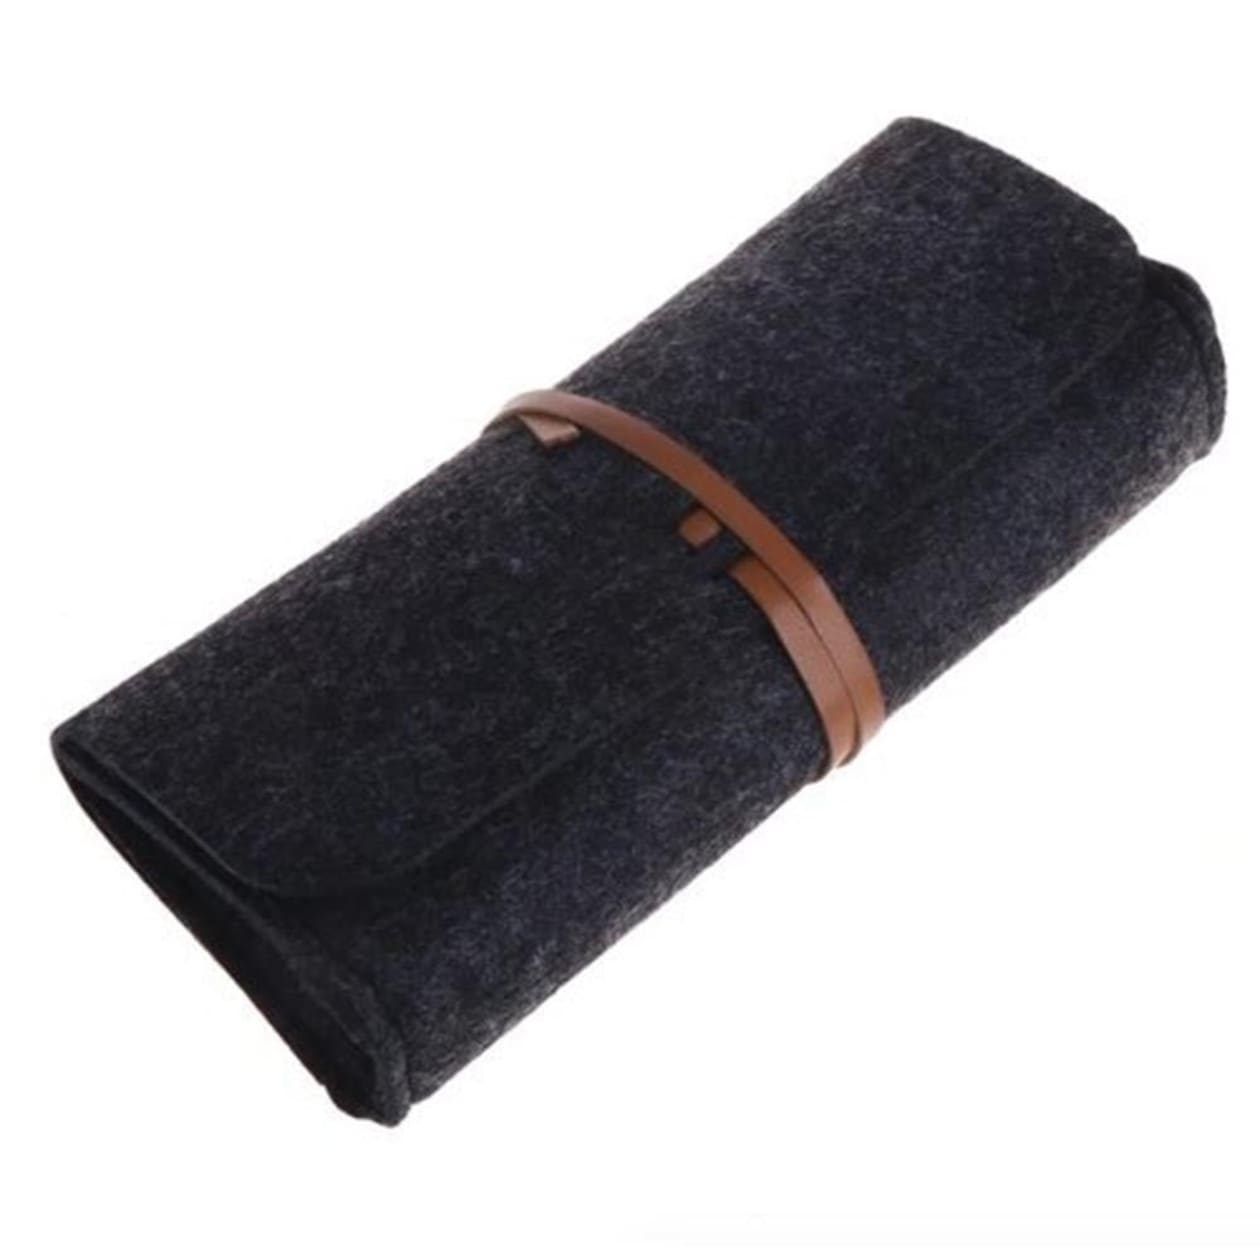 Felted Fabric Sunglasses Case in Black with Faux Leather Wrap Tie